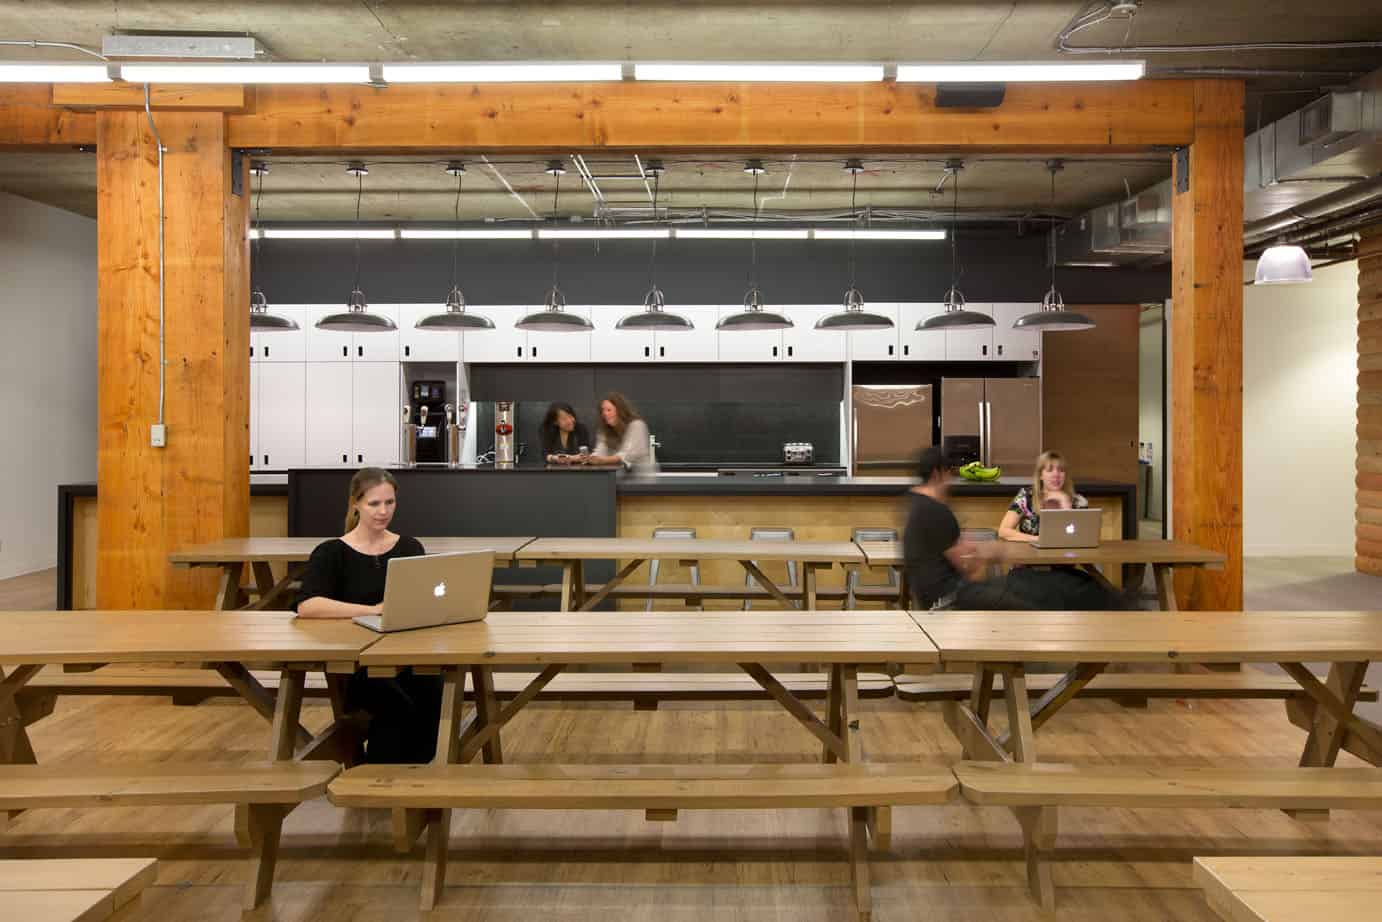 Inside Look: Hootsuite's Office Gets an Inclusive Redesign